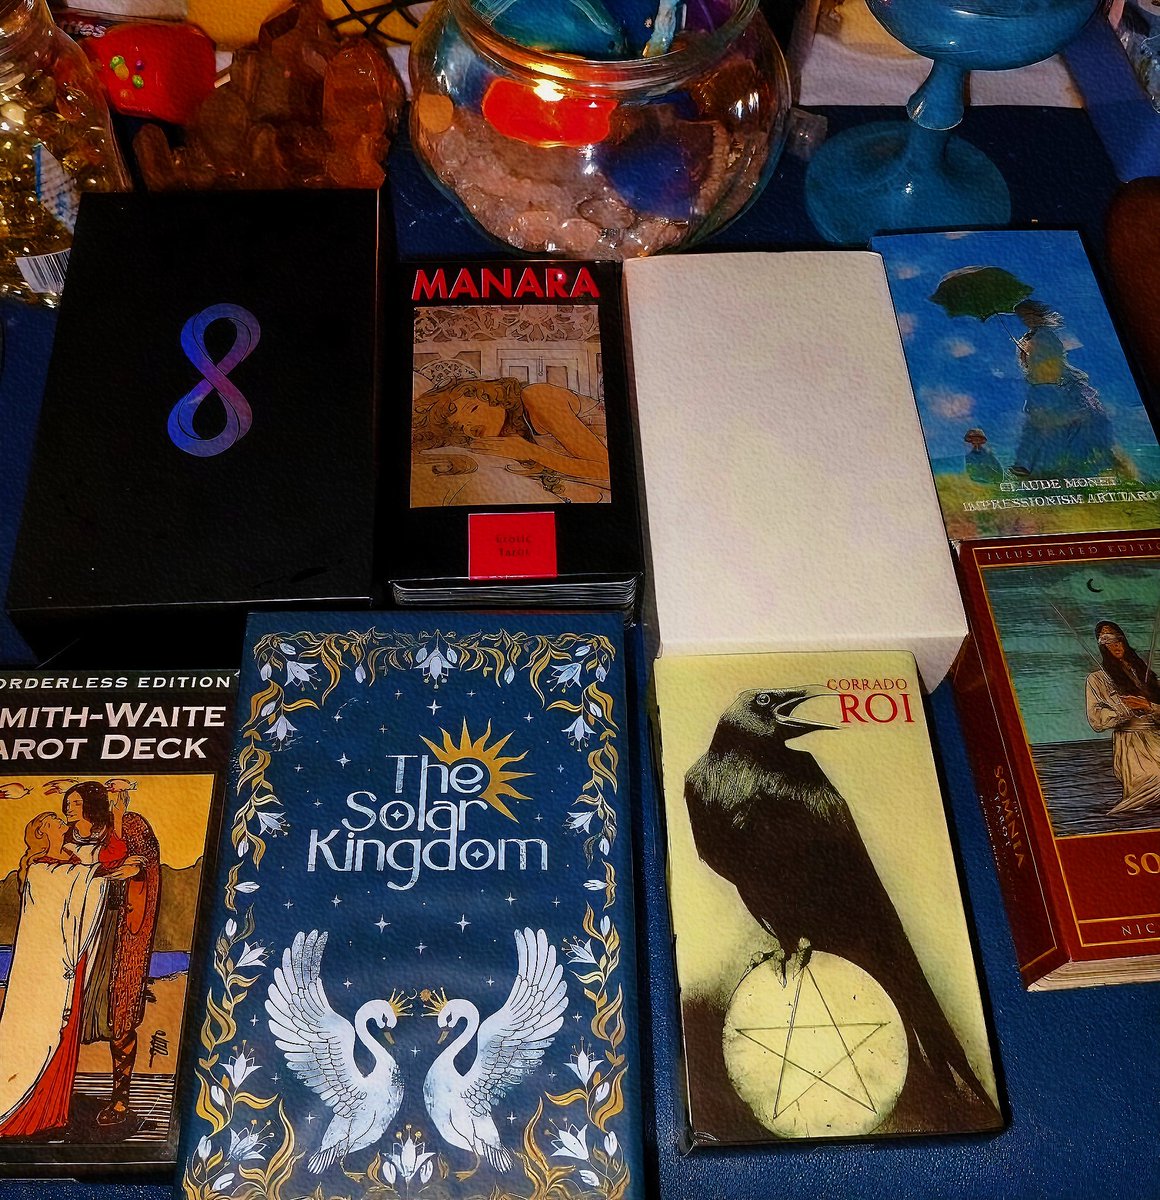 #tarot #tarotreading #tarotreader #tarotcards 
help anxious confused you predict the future, give the best and most reasonable explanation, the pain you pull out of the mire.this is our responsibility.
It's on sale now for only 15 euros to answer a question。